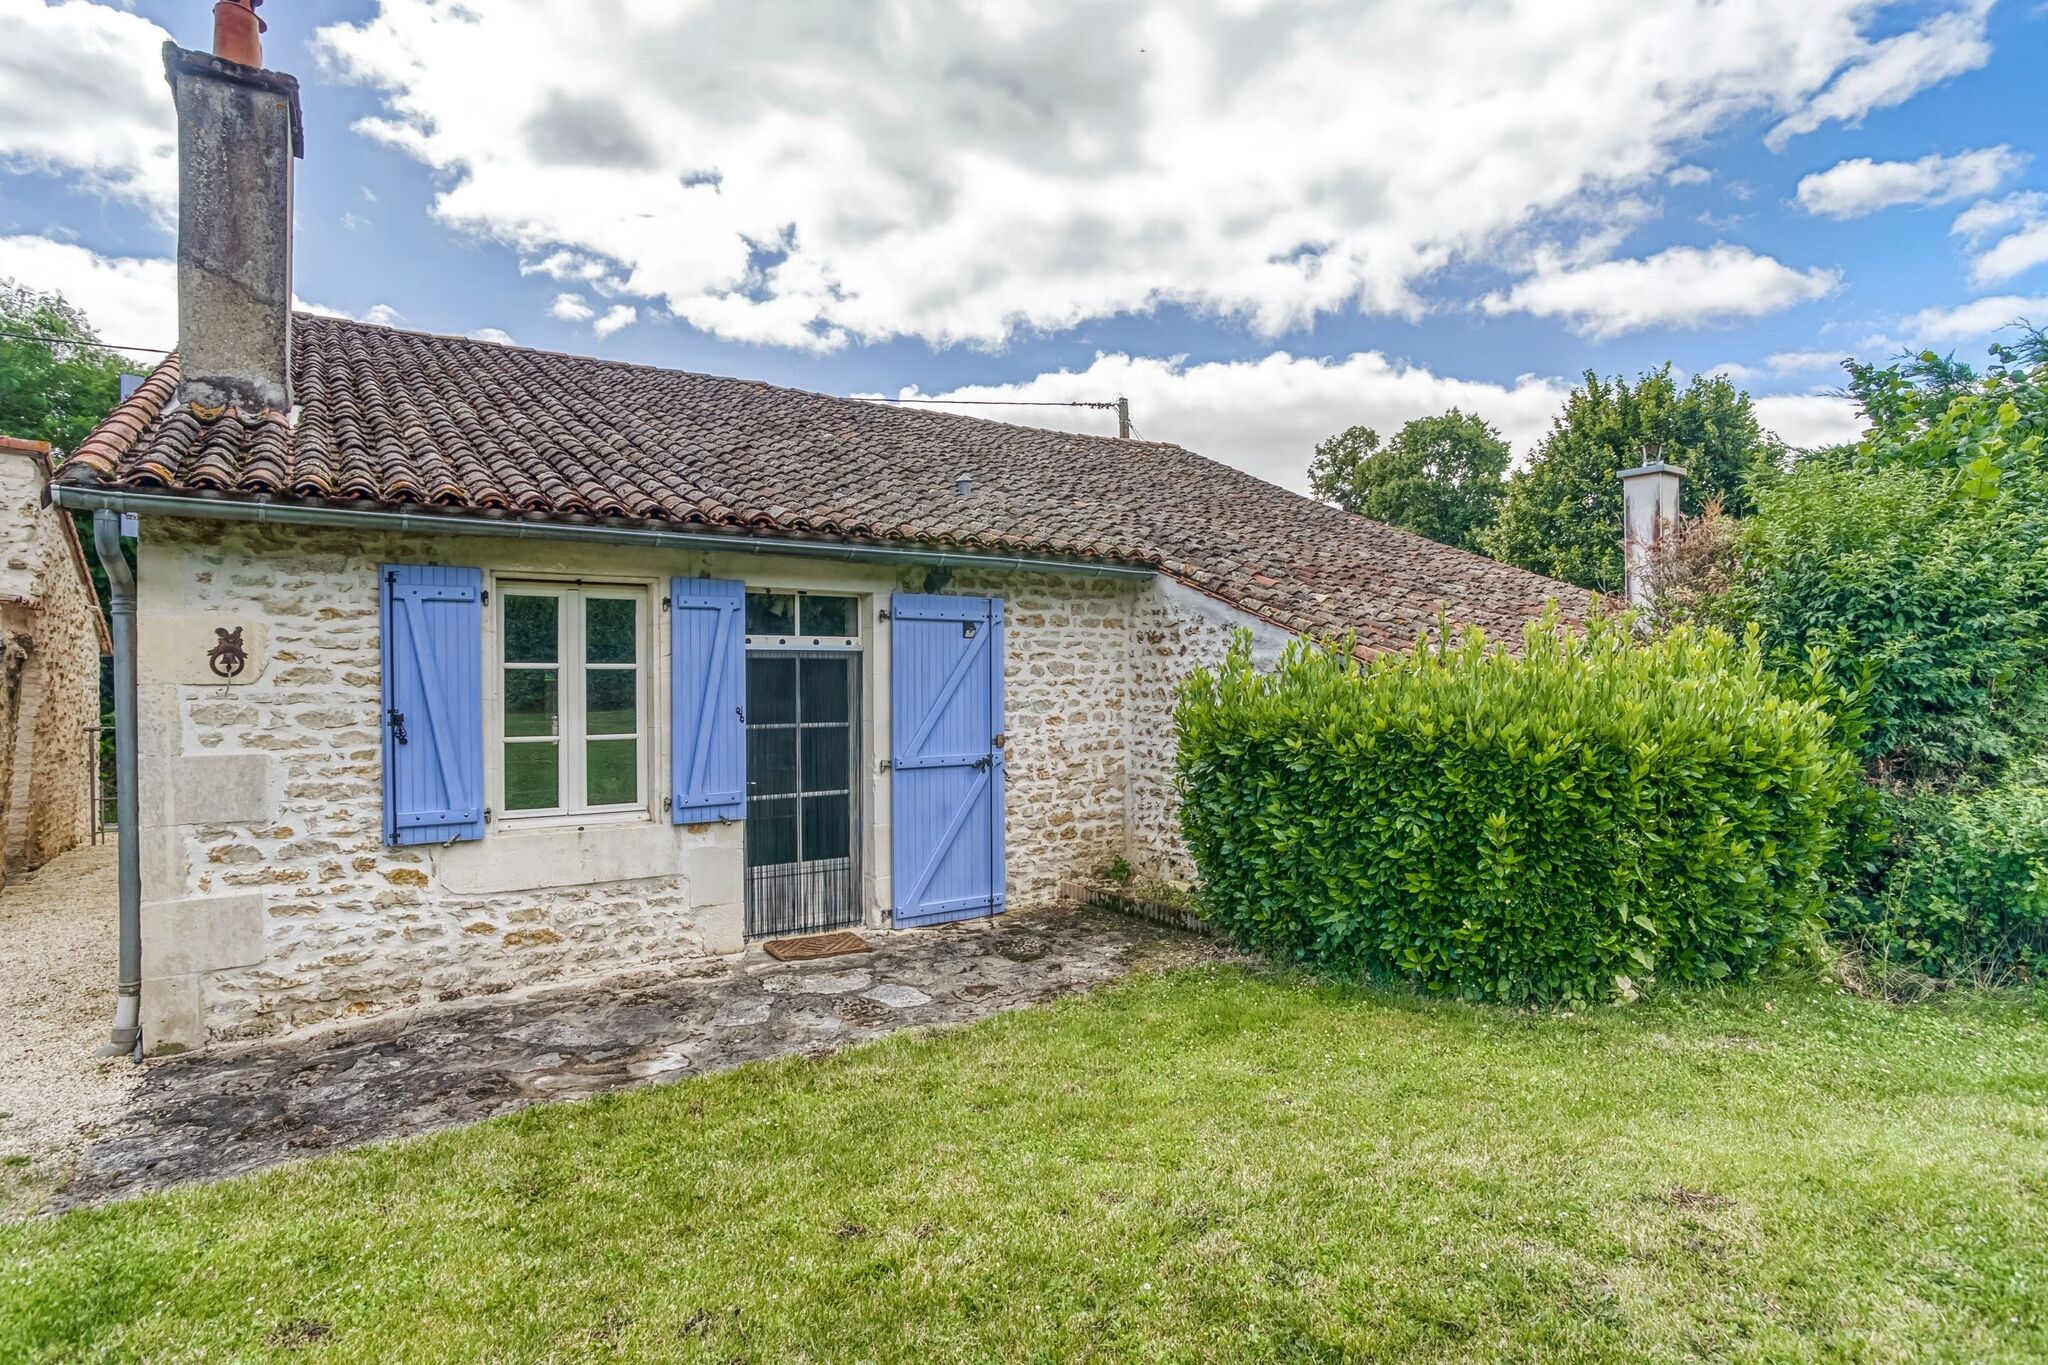 Holiday Home with Private Swimming Pool, close to Poitiers, France.